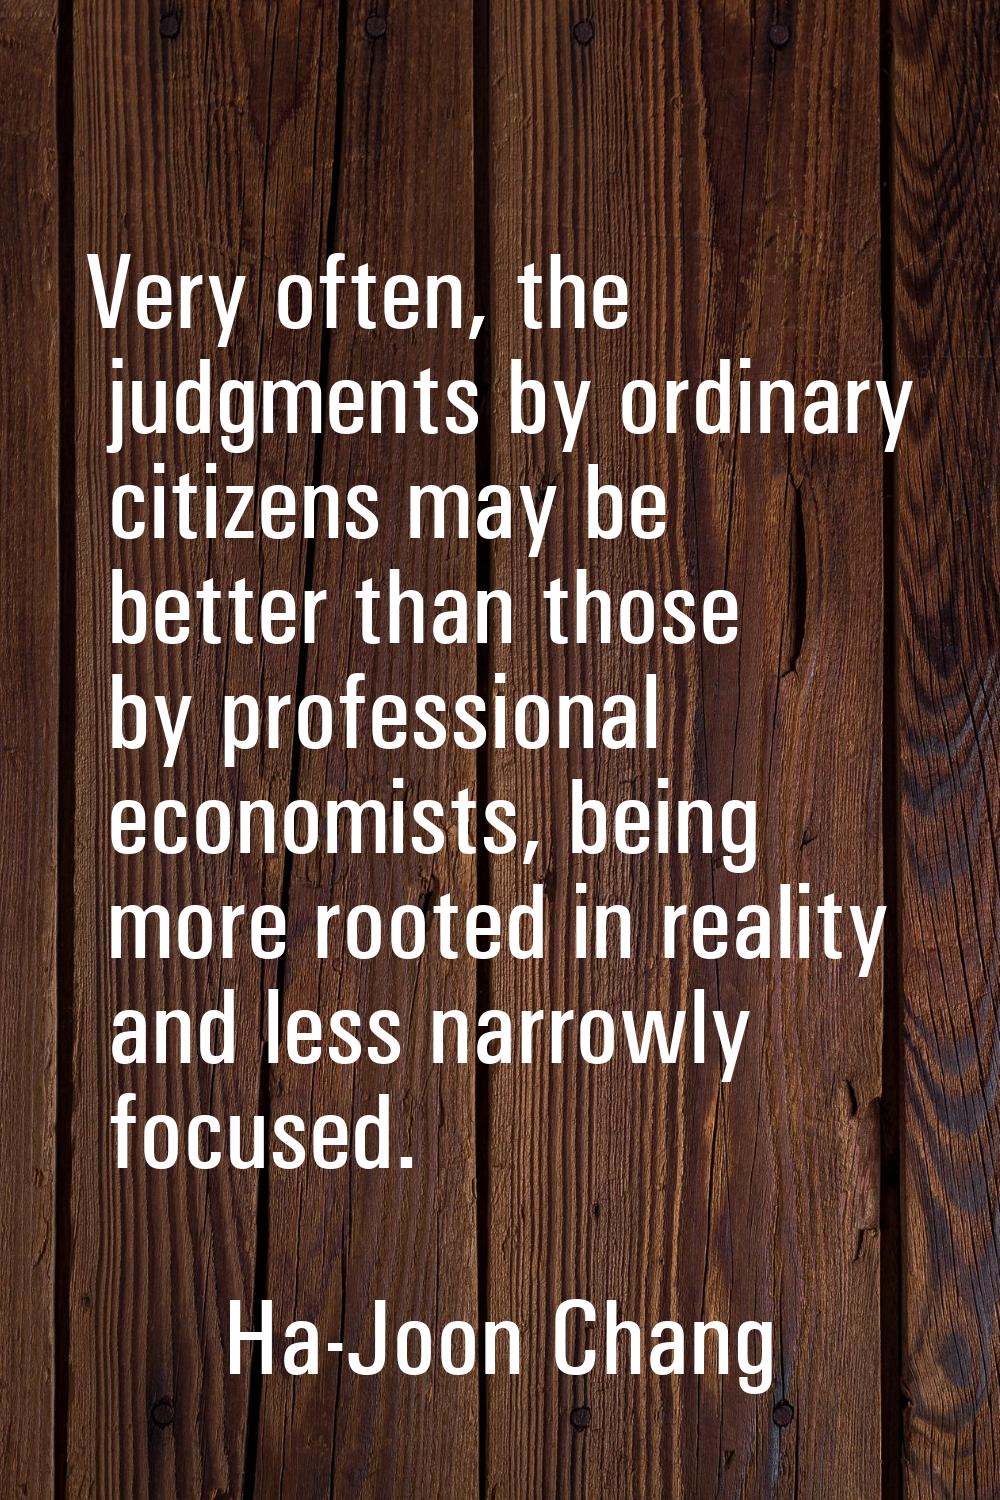 Very often, the judgments by ordinary citizens may be better than those by professional economists,